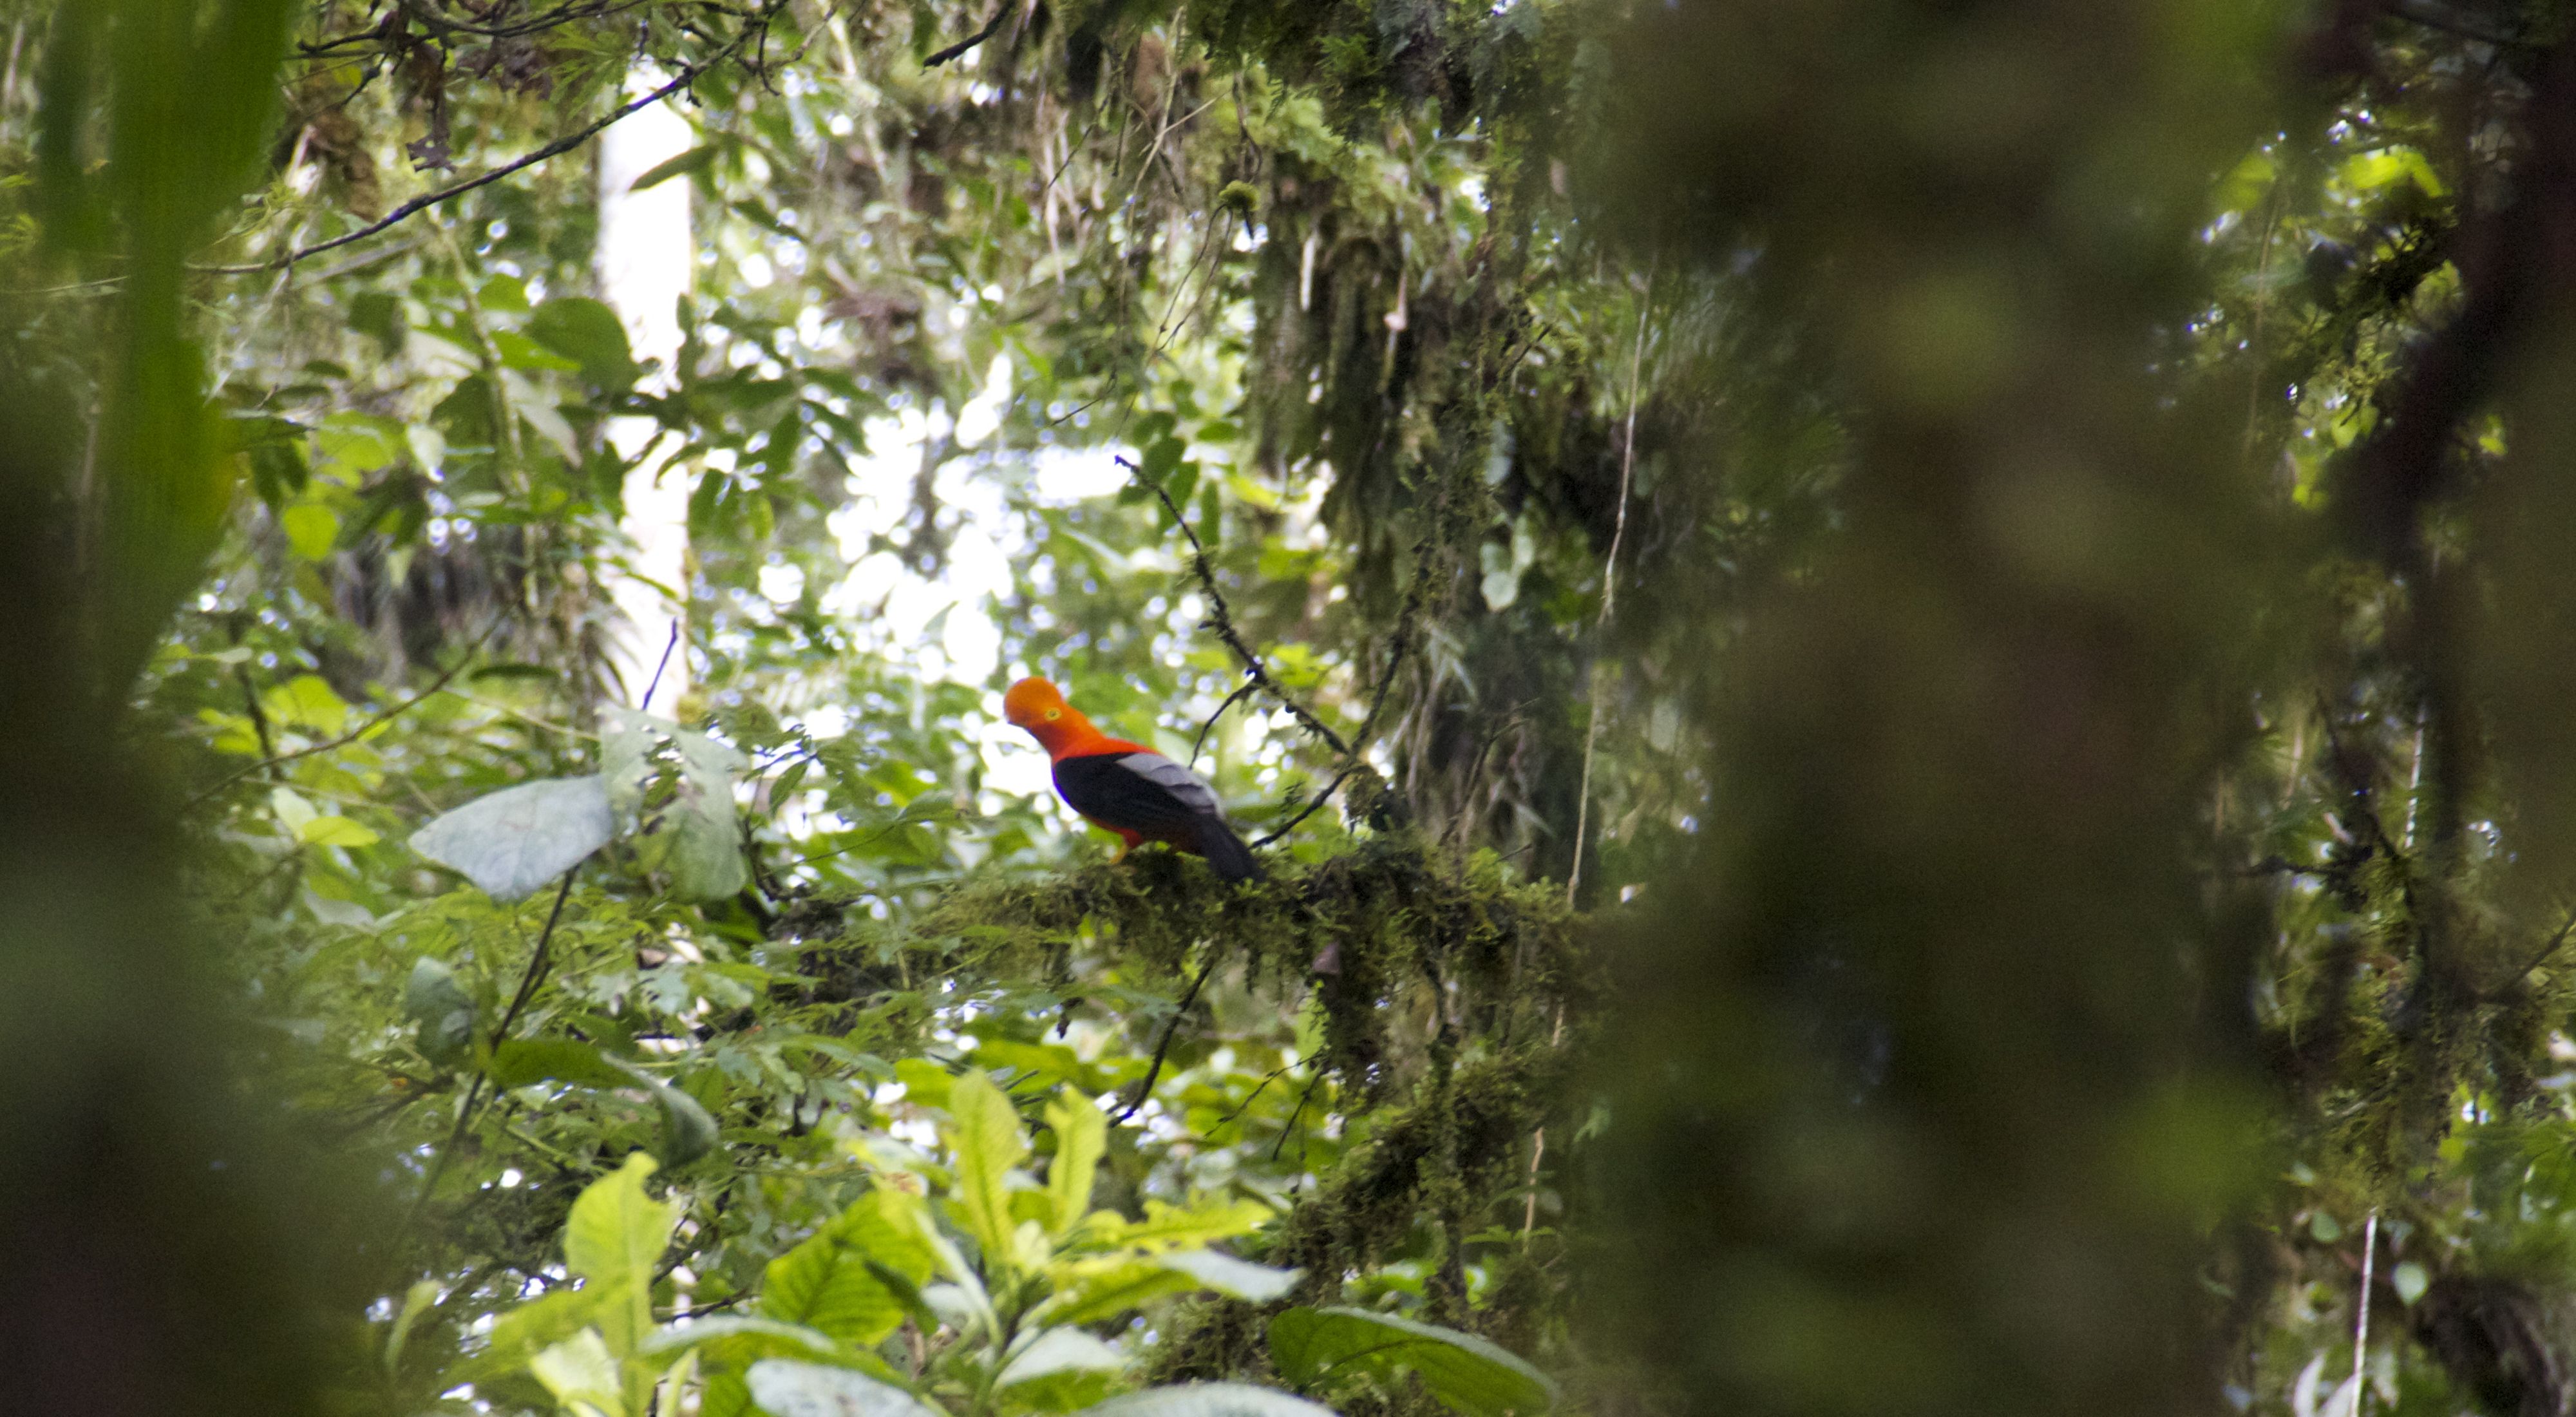 A view of the forest, with a black and orange bird perched on a branch in the background